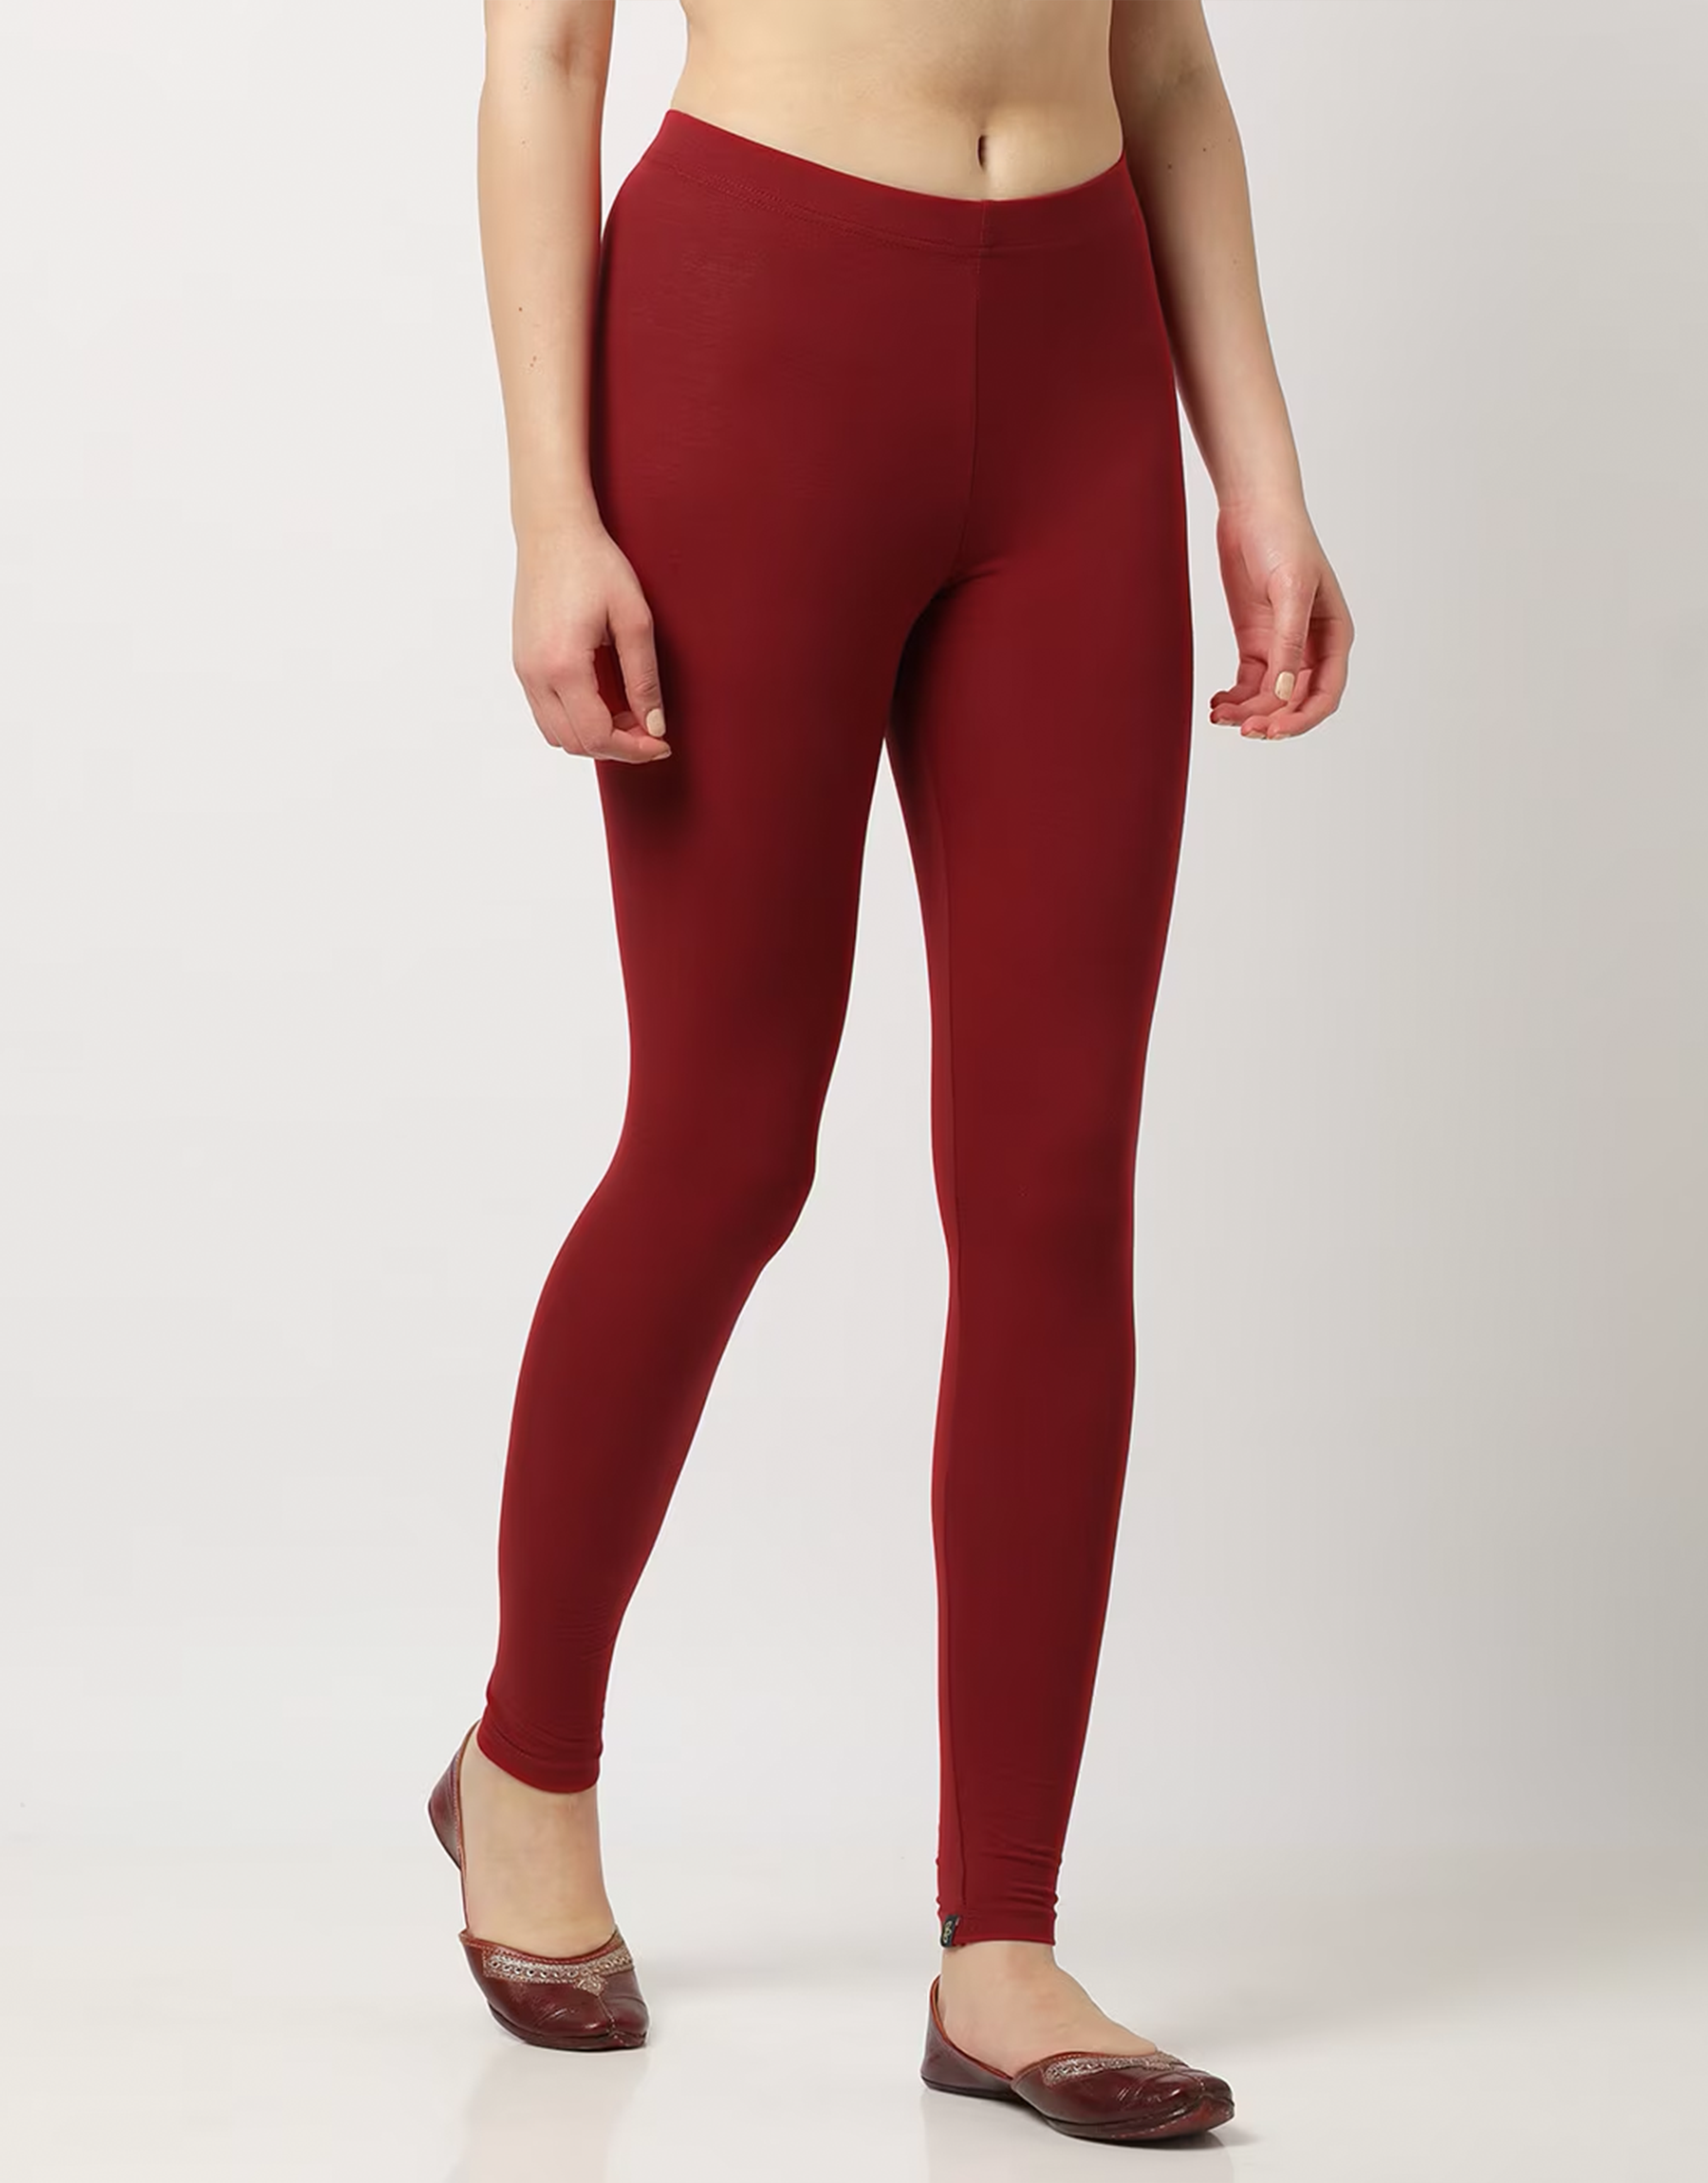 Churidar Fit Mixed Cotton with Spandex Stretchable Leggings Maroon-sonthuy.vn